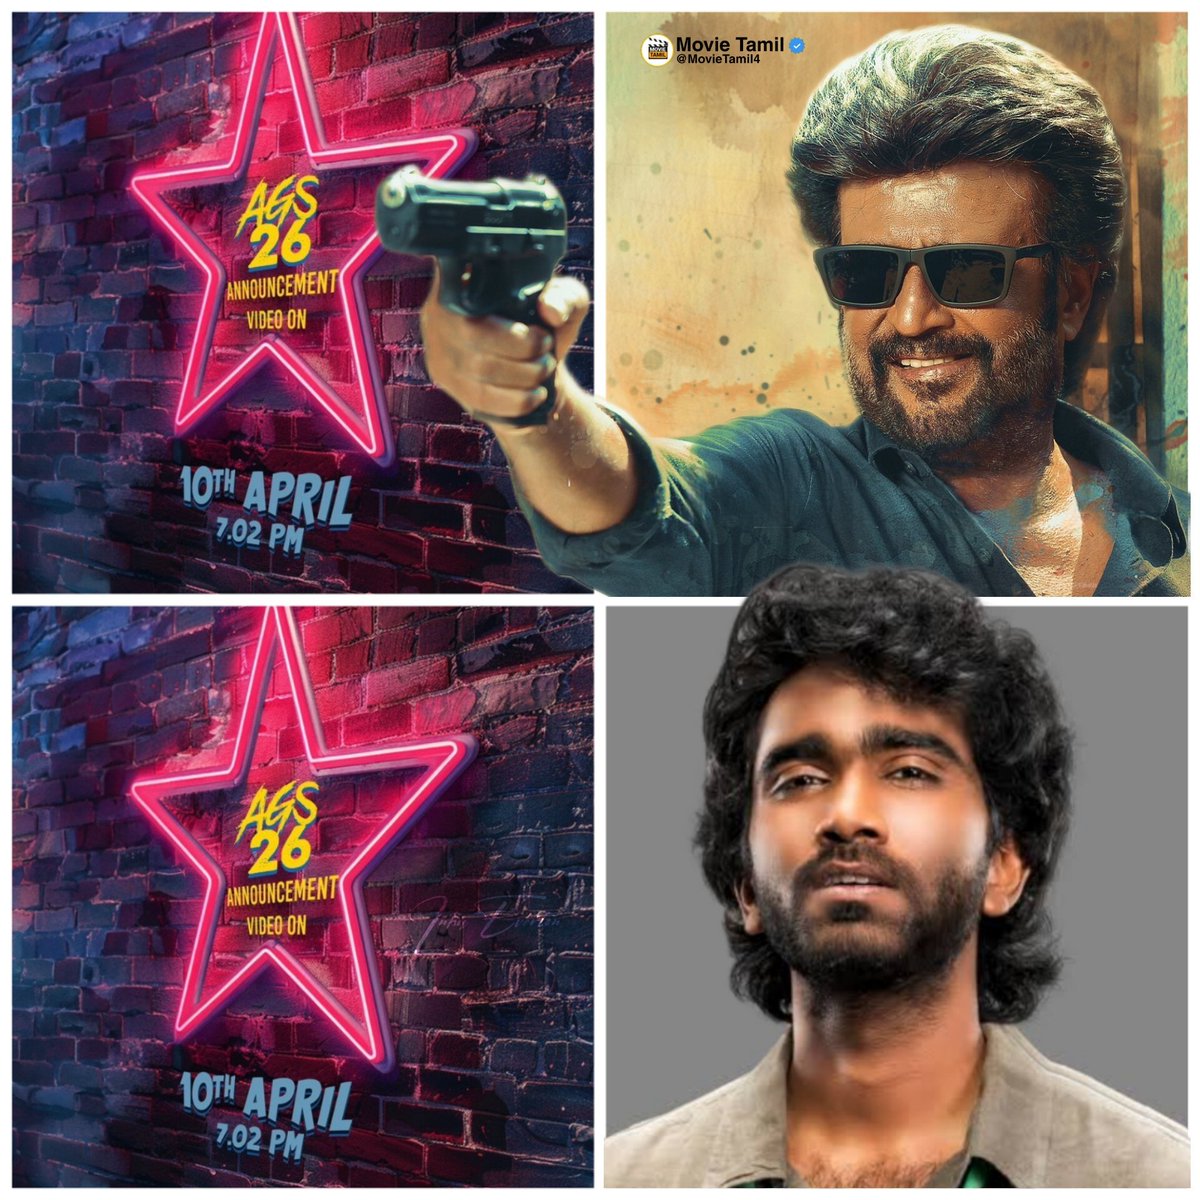 NEW FILM : #AGS26 ✅

- AGS will announce the next film today at 7:02 PM. 🤜🤛

Let's wait and see who is going to direct this film and who is the hero.

 - #SuperstarRajinikanth Project.?
or
- #PradeepRanganathan nd Project ? 🤔

Summa Jollyaa Oru Padam!!

#Vettaiyan